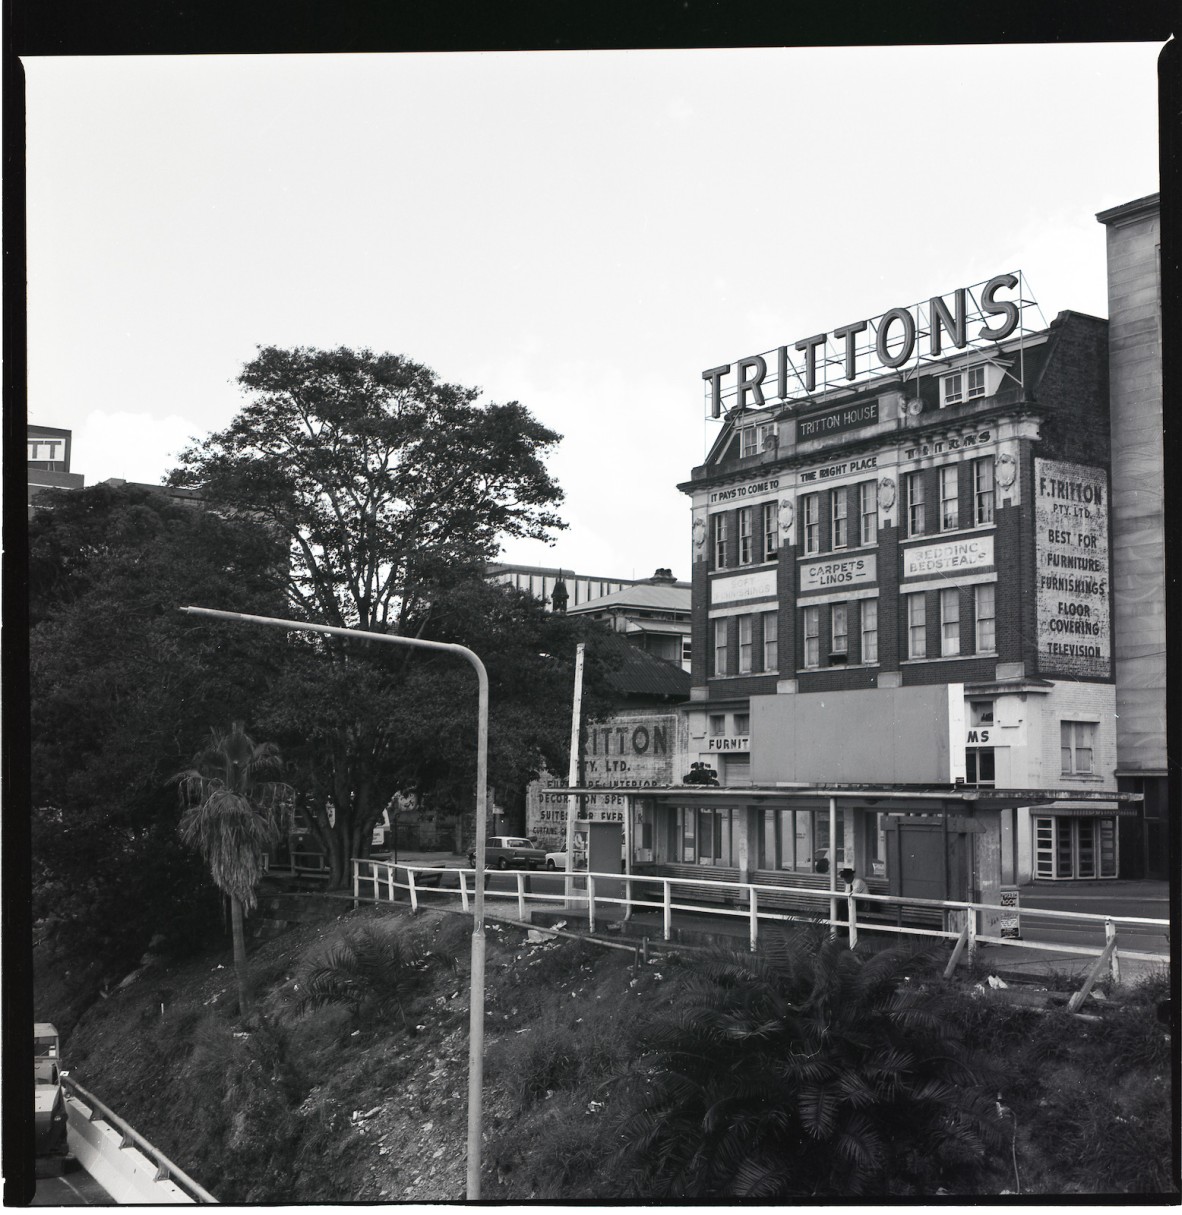 Street view photograph of Tritton Building in George Street, Brisbane. 1970s